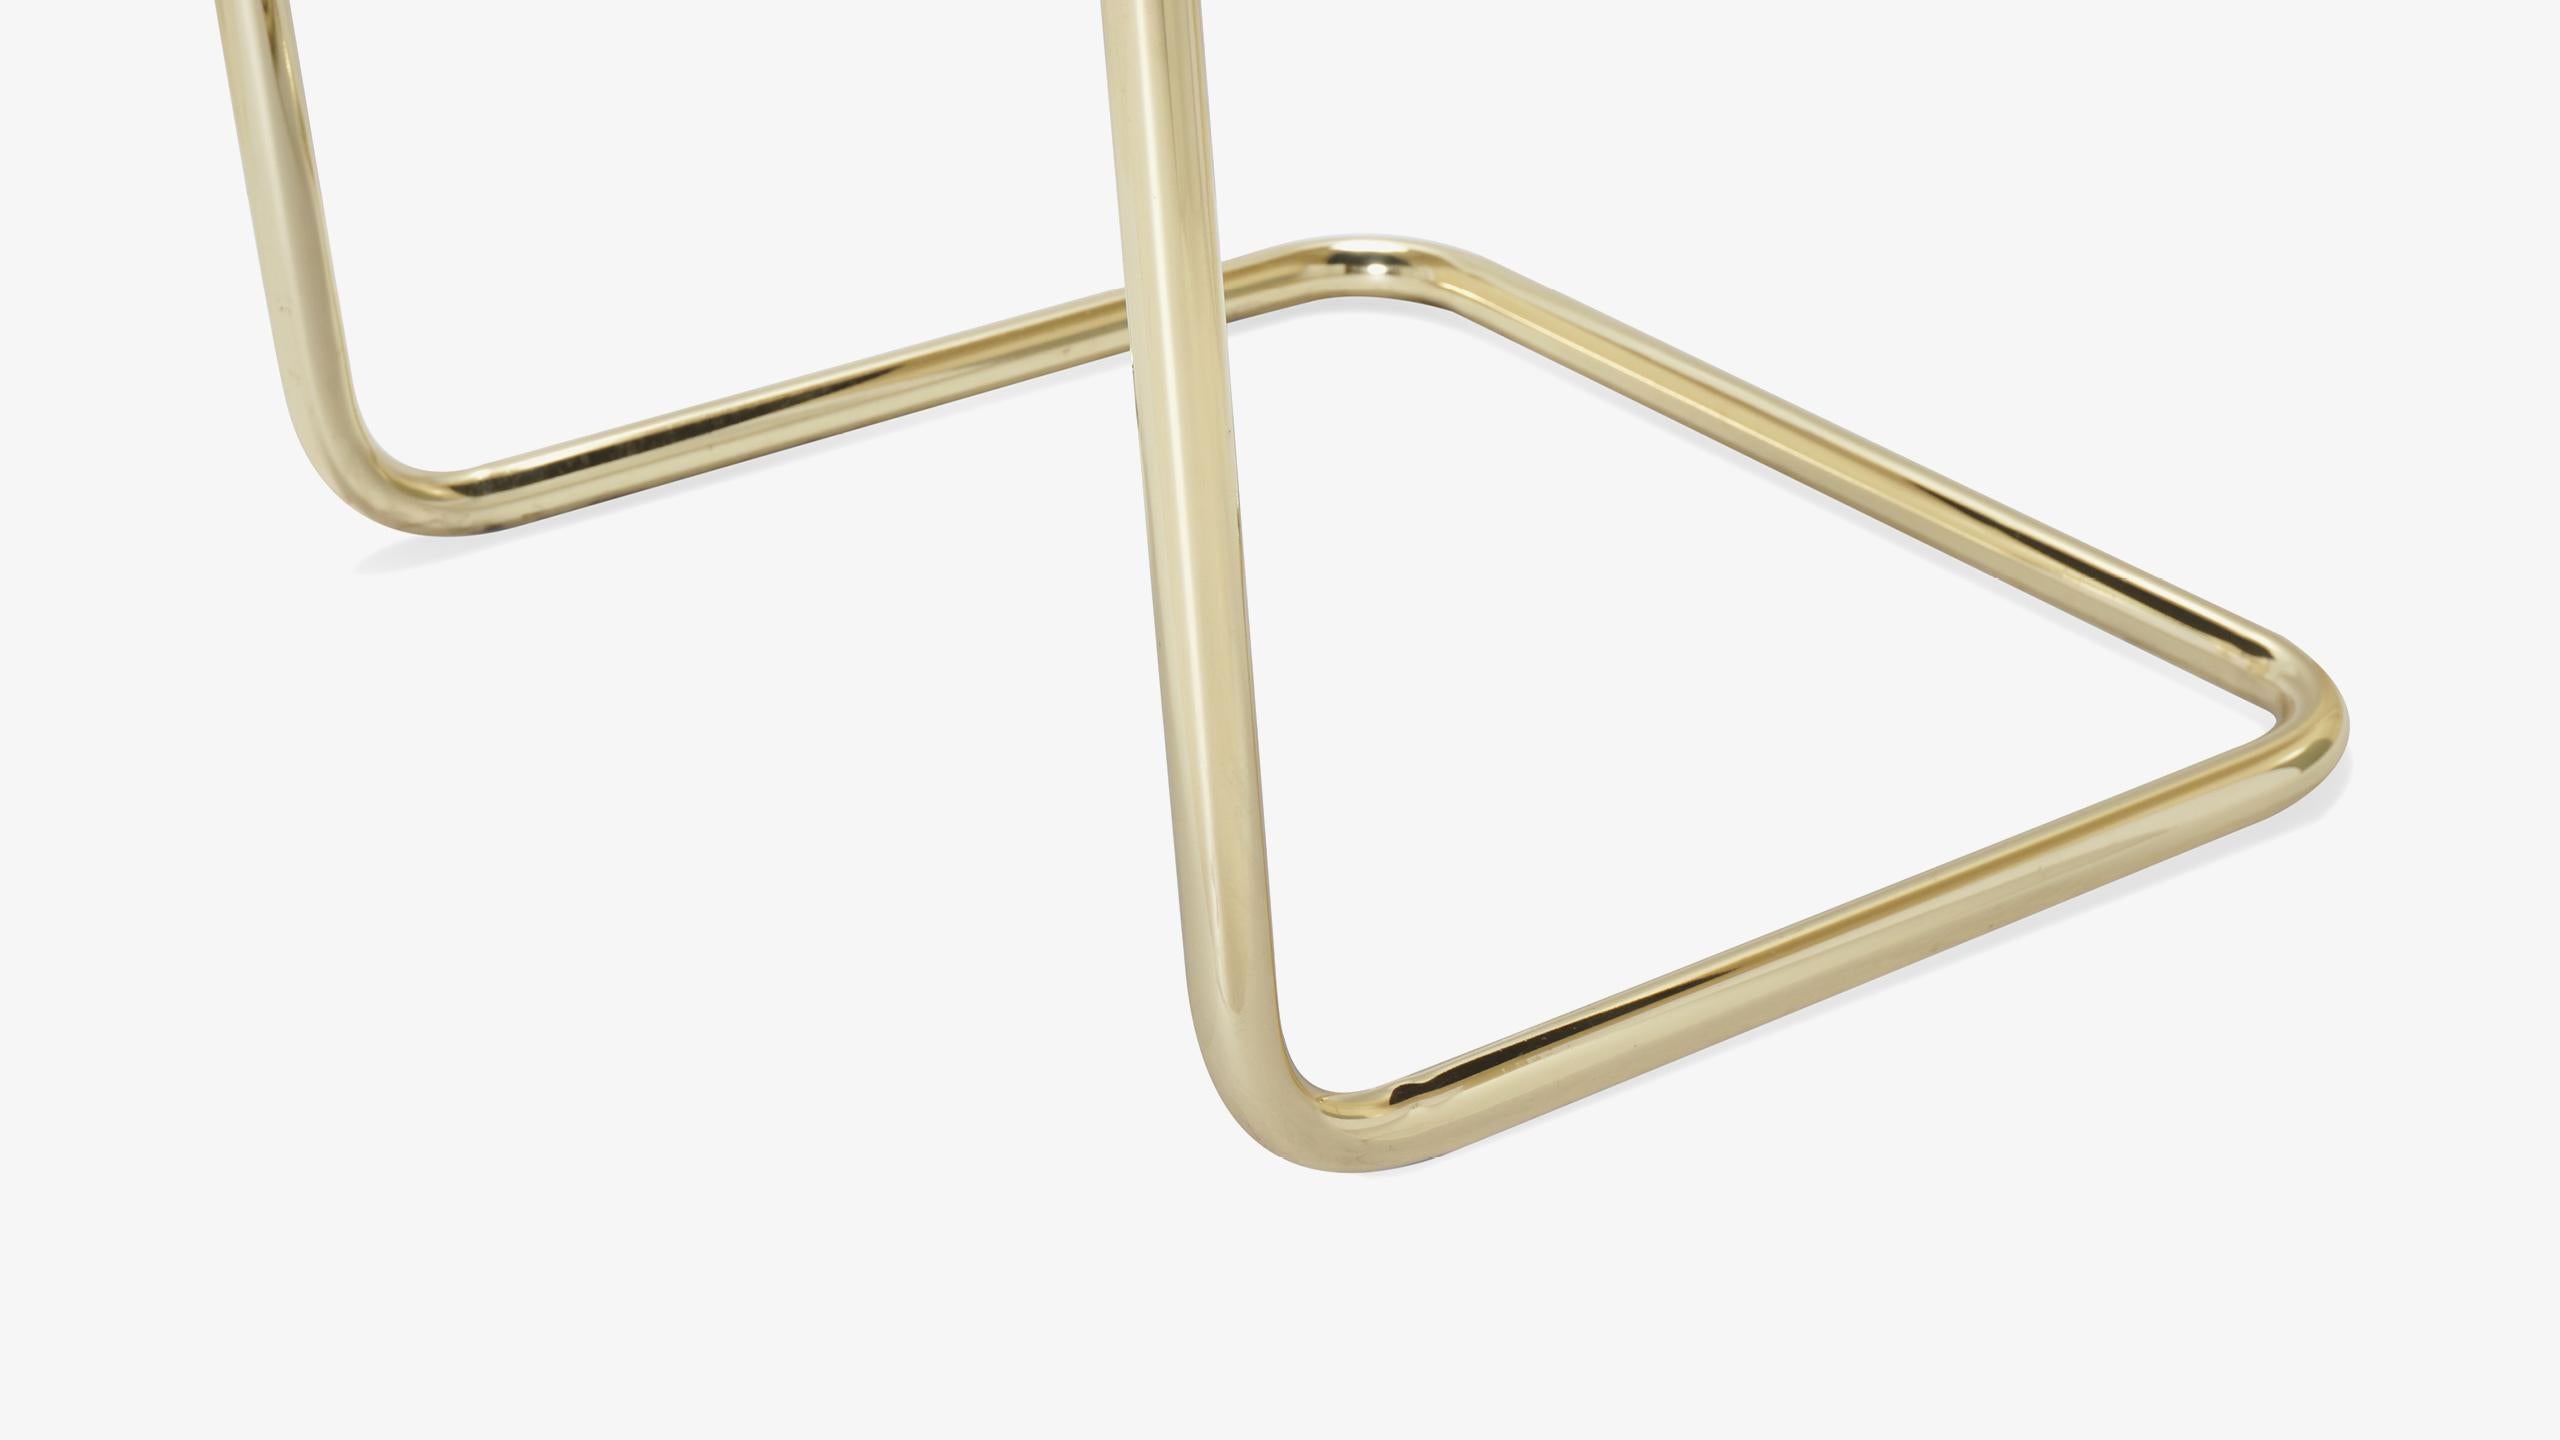 Mid-20th Century Brno Tubular Chairs in Velvet Polished Brass by Mies van der Rohe for Knoll, 6